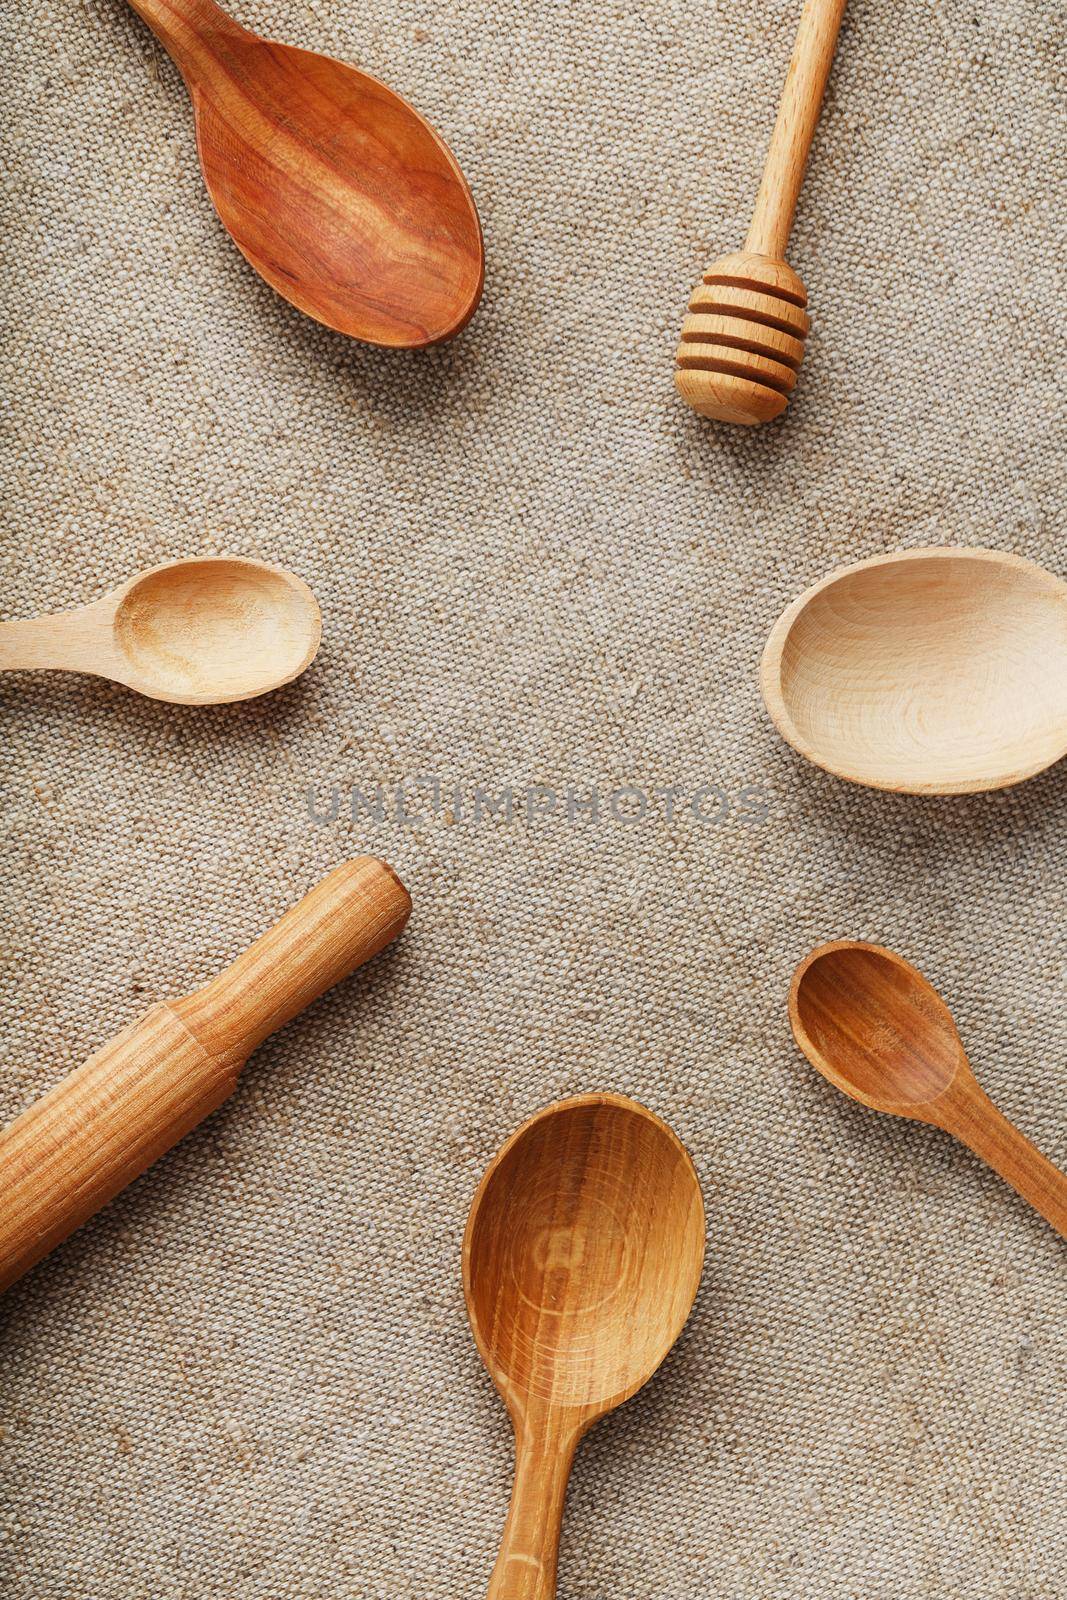 Natural wood spoons in a row on burlap fabric. Natural natural materials. by AlexGrec